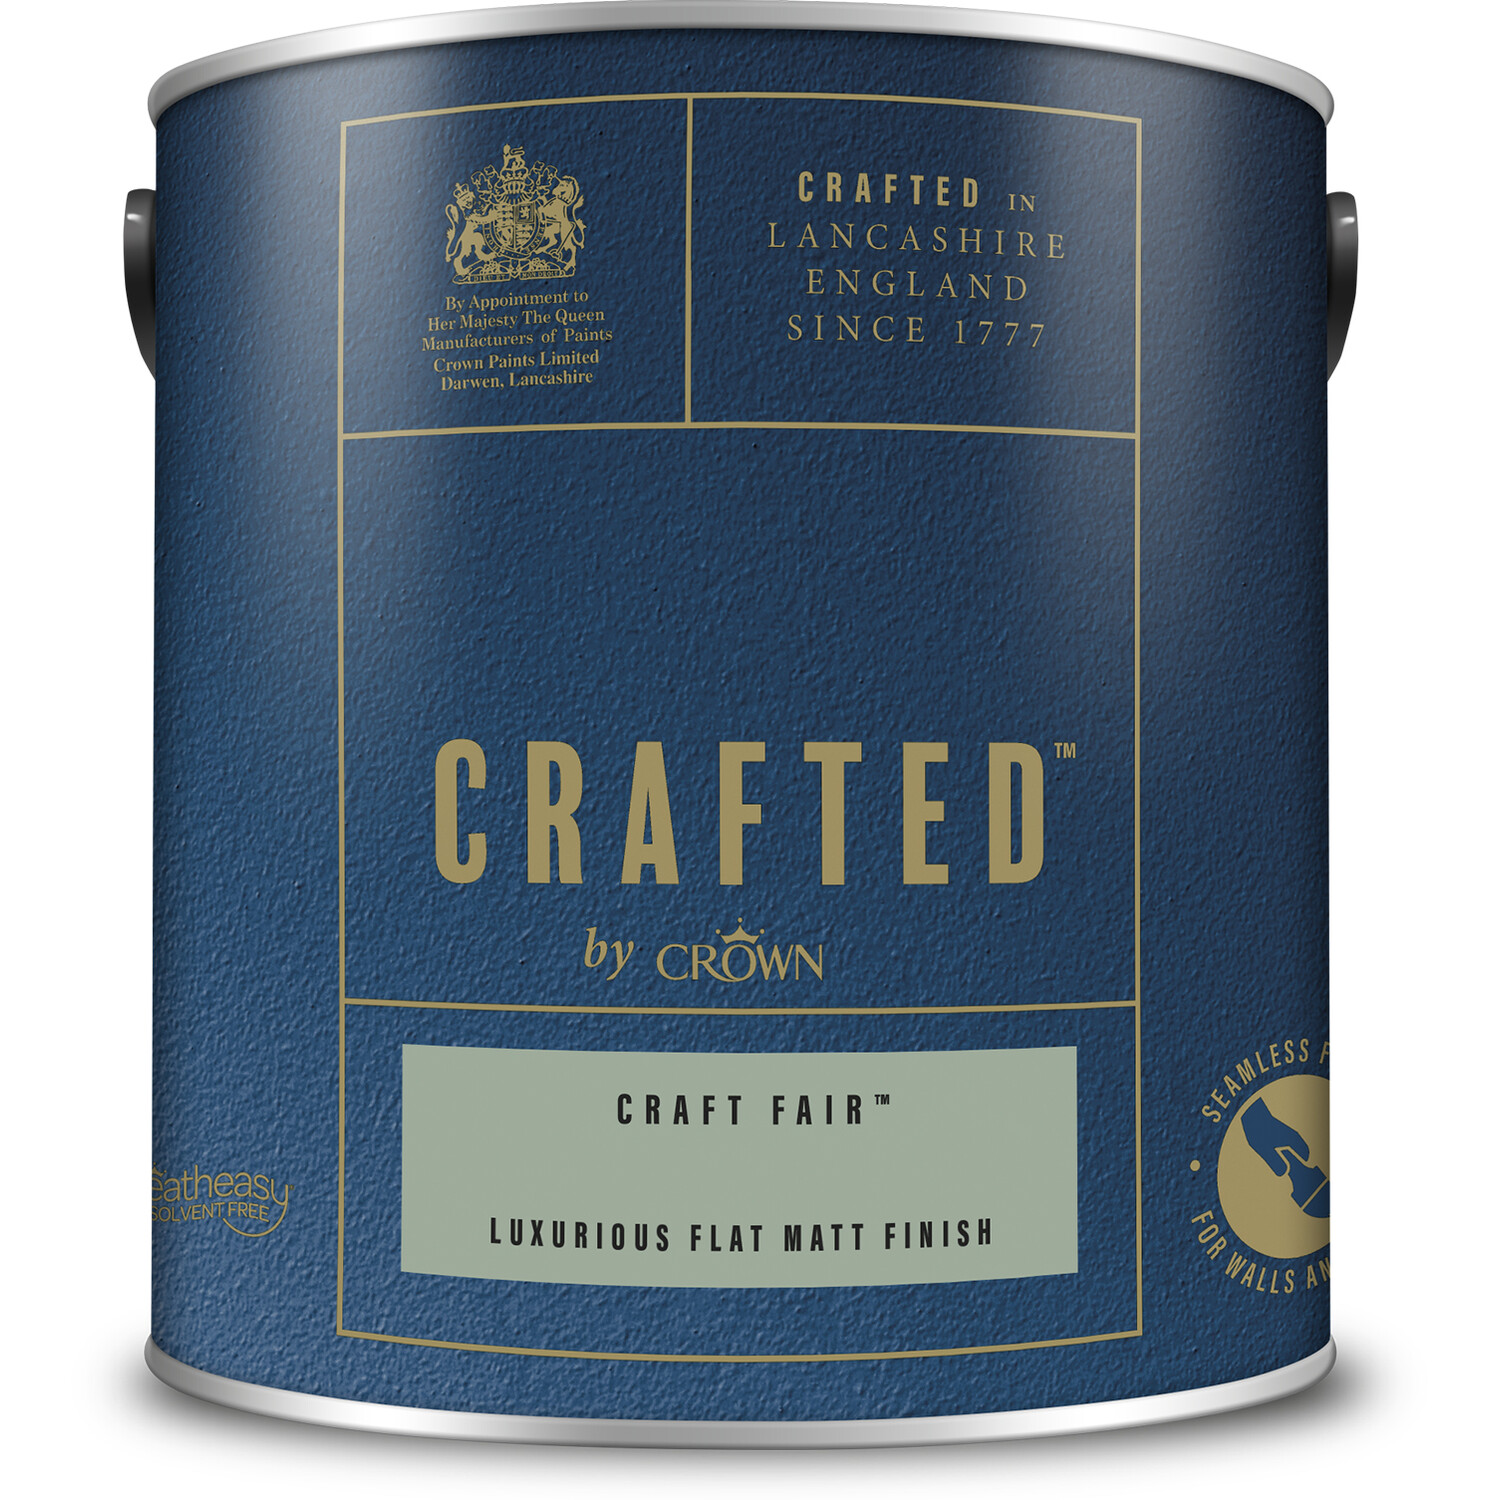 Crown Crafted Walls and Wood Craft Fair Luxurious Flat Matt Paint 2.5L Image 2